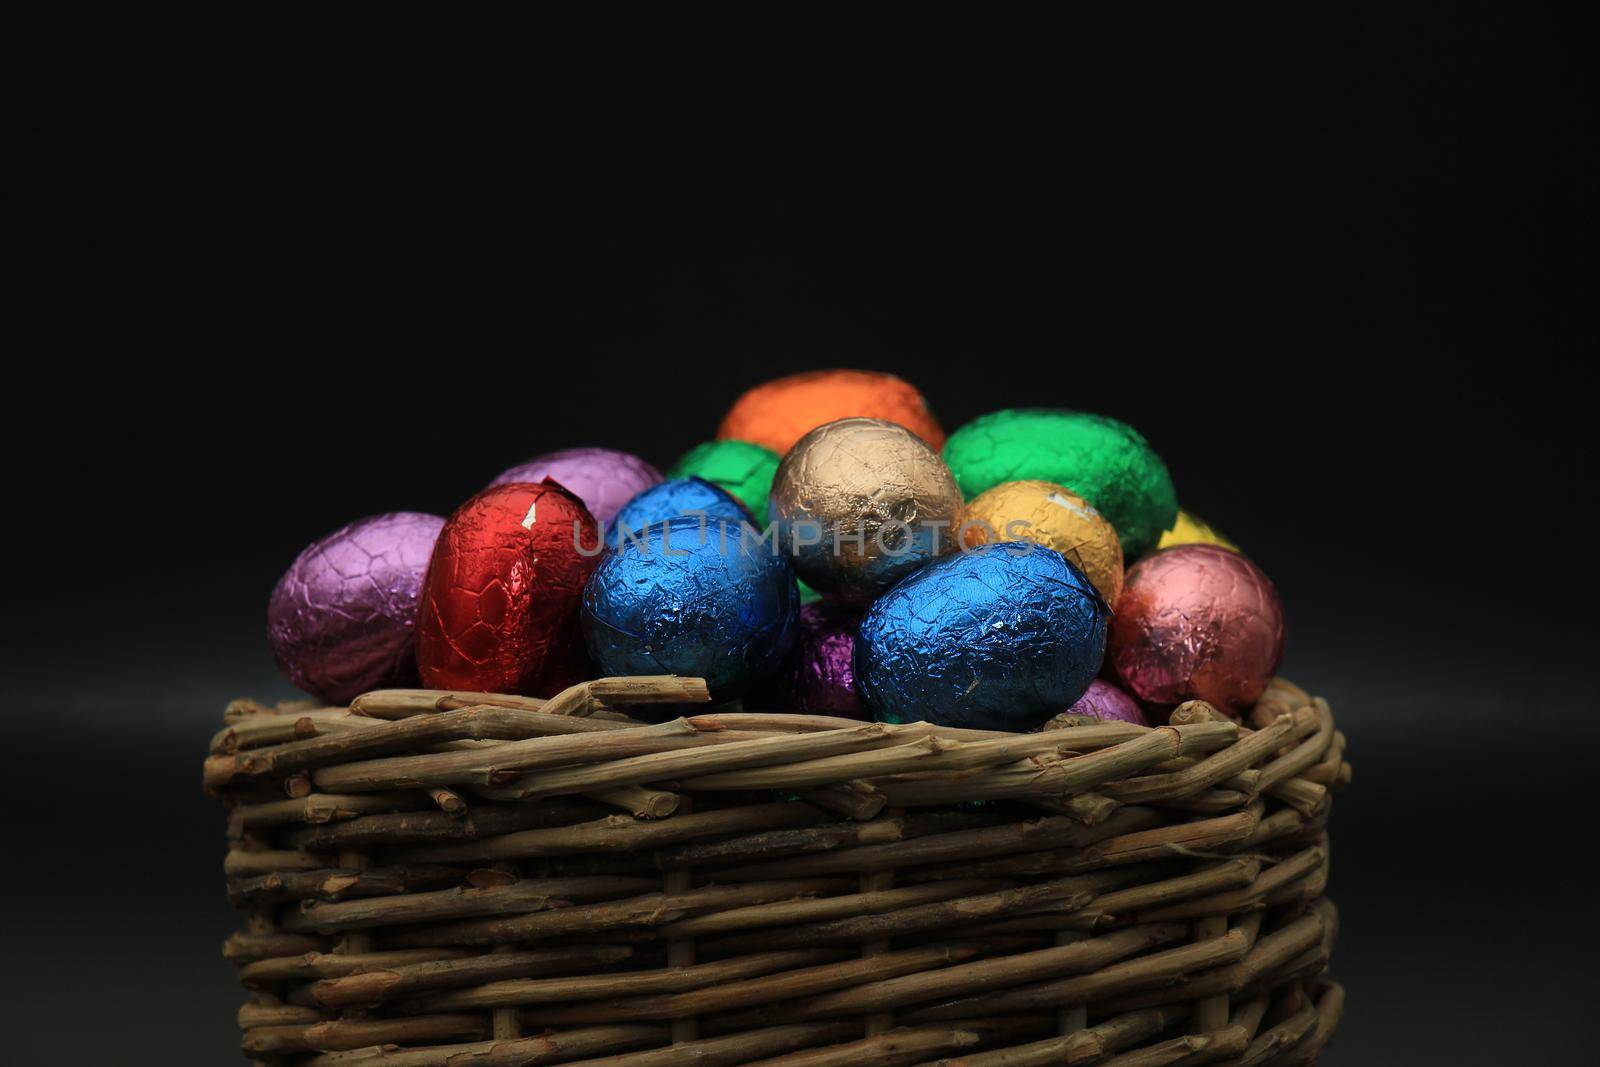 Foil wrapped chocolate easter eggs in a wicker basket